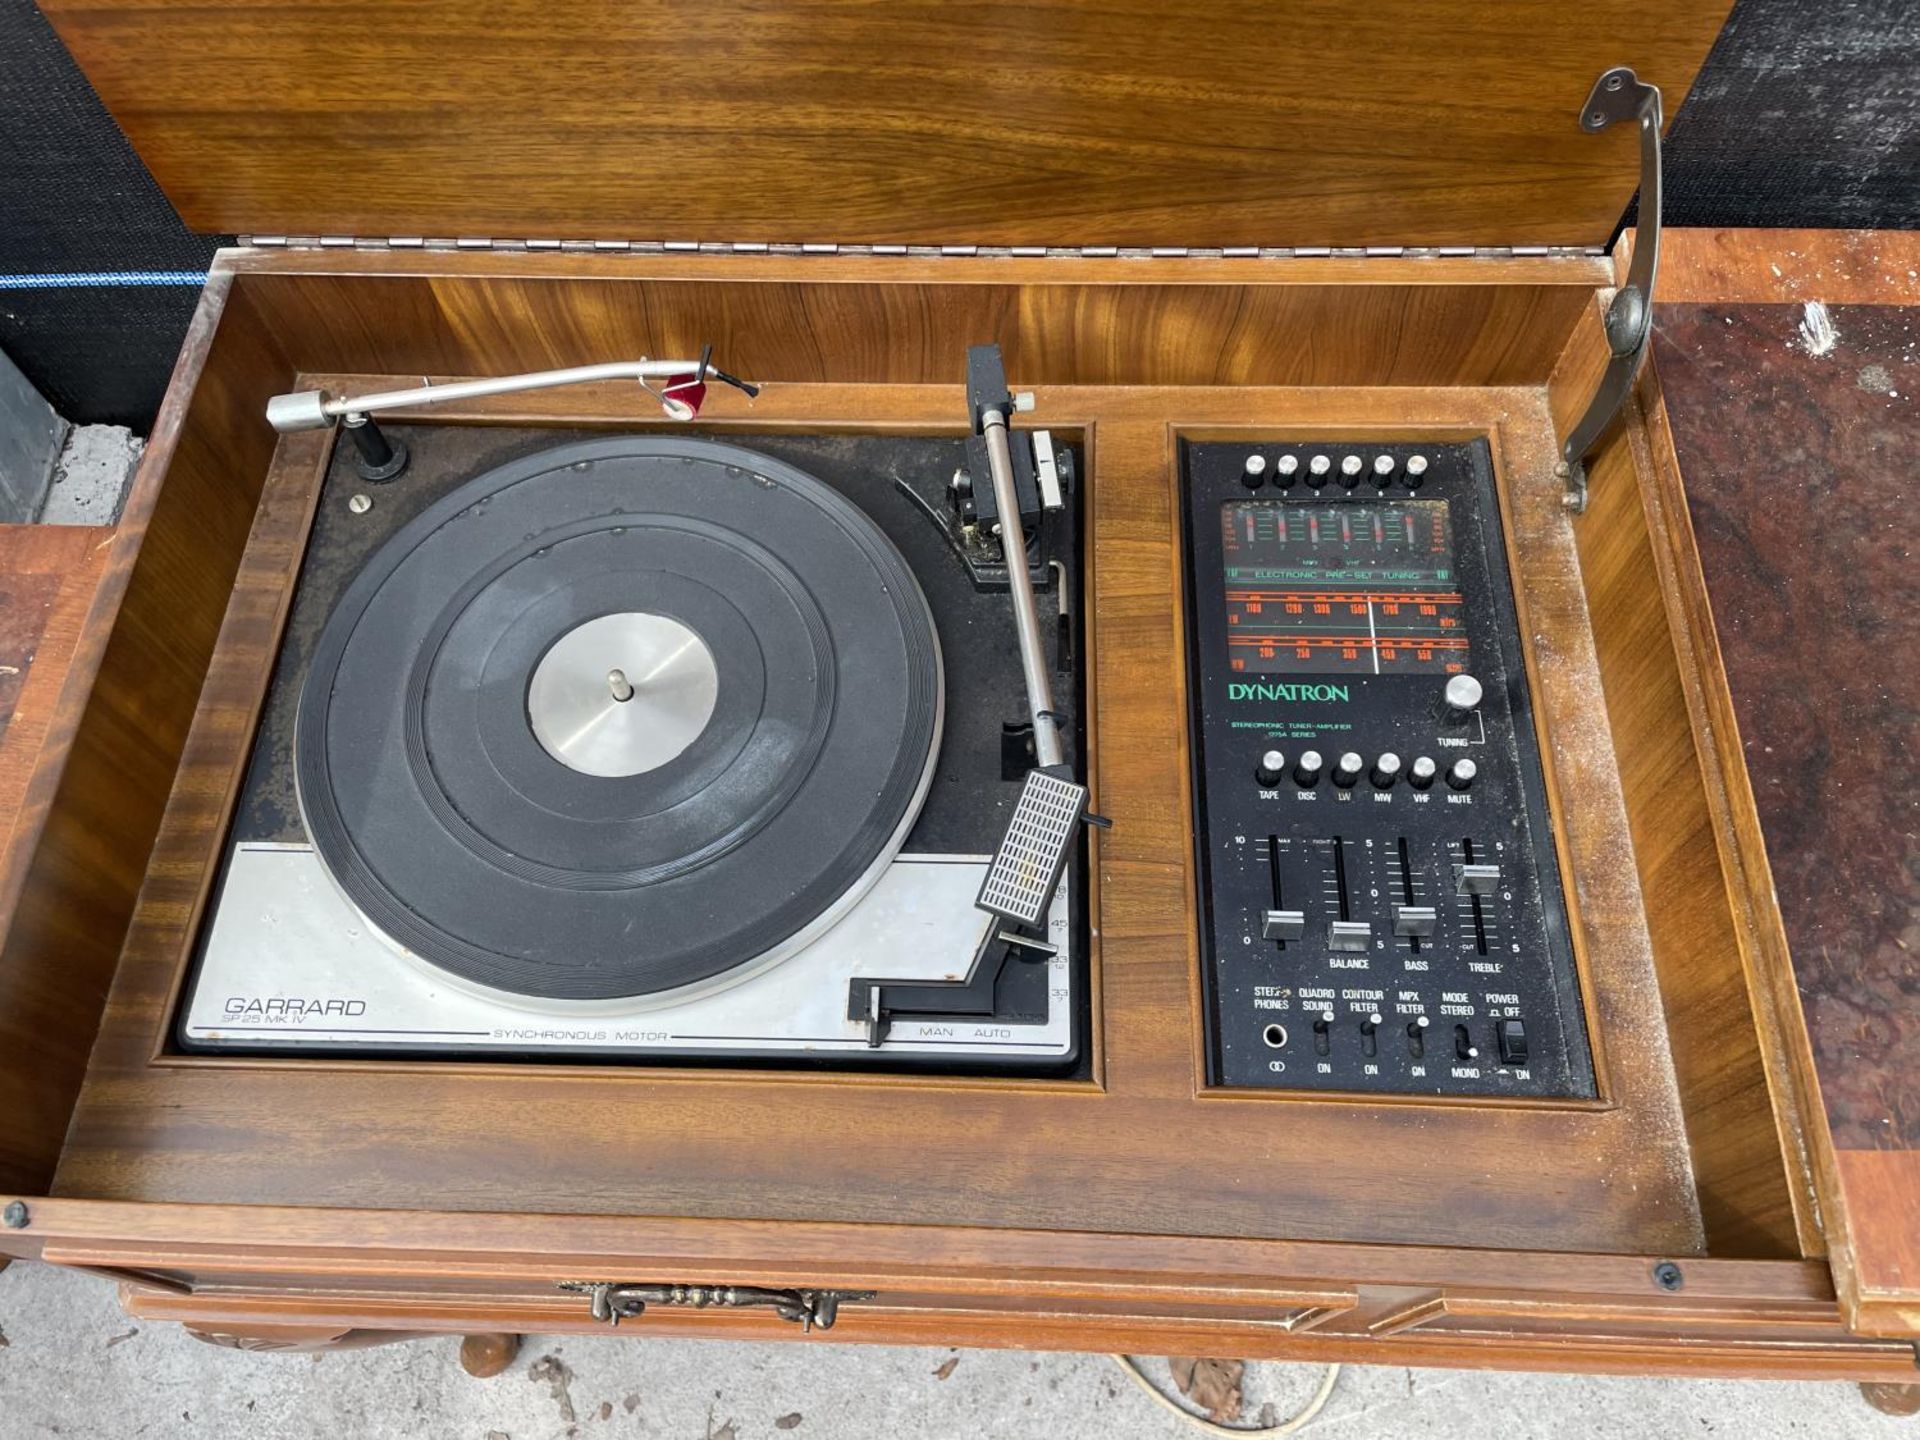 A DYNATRON YEW WOOD STEREO WITH GARRARD DECK COMPLETE WITH 2 SPEAKERS - Image 2 of 6